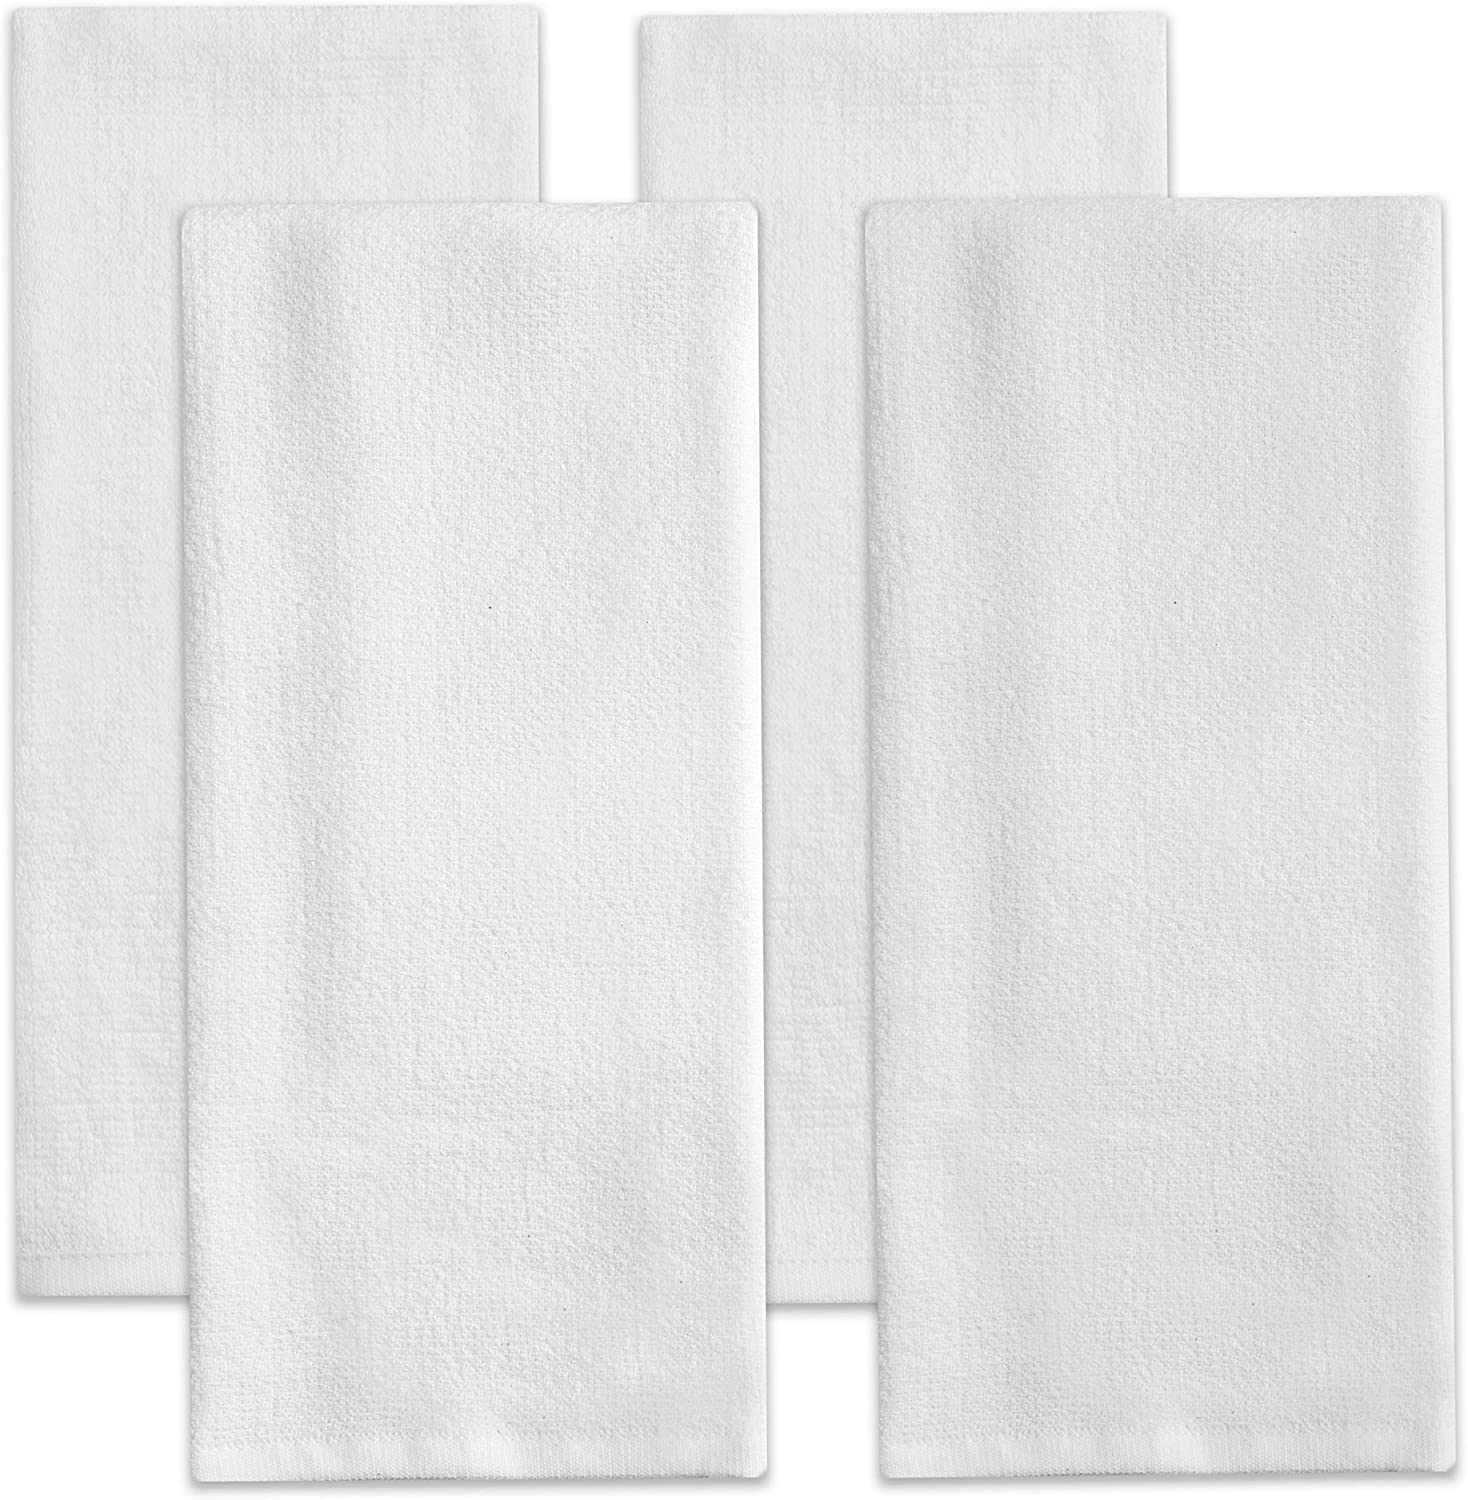 Sticky Toffee Kitchen Dishcloths Towels 100% Cotton, Set of 8, Brown and White Dish Cloth Towels, 12 in x 12 in